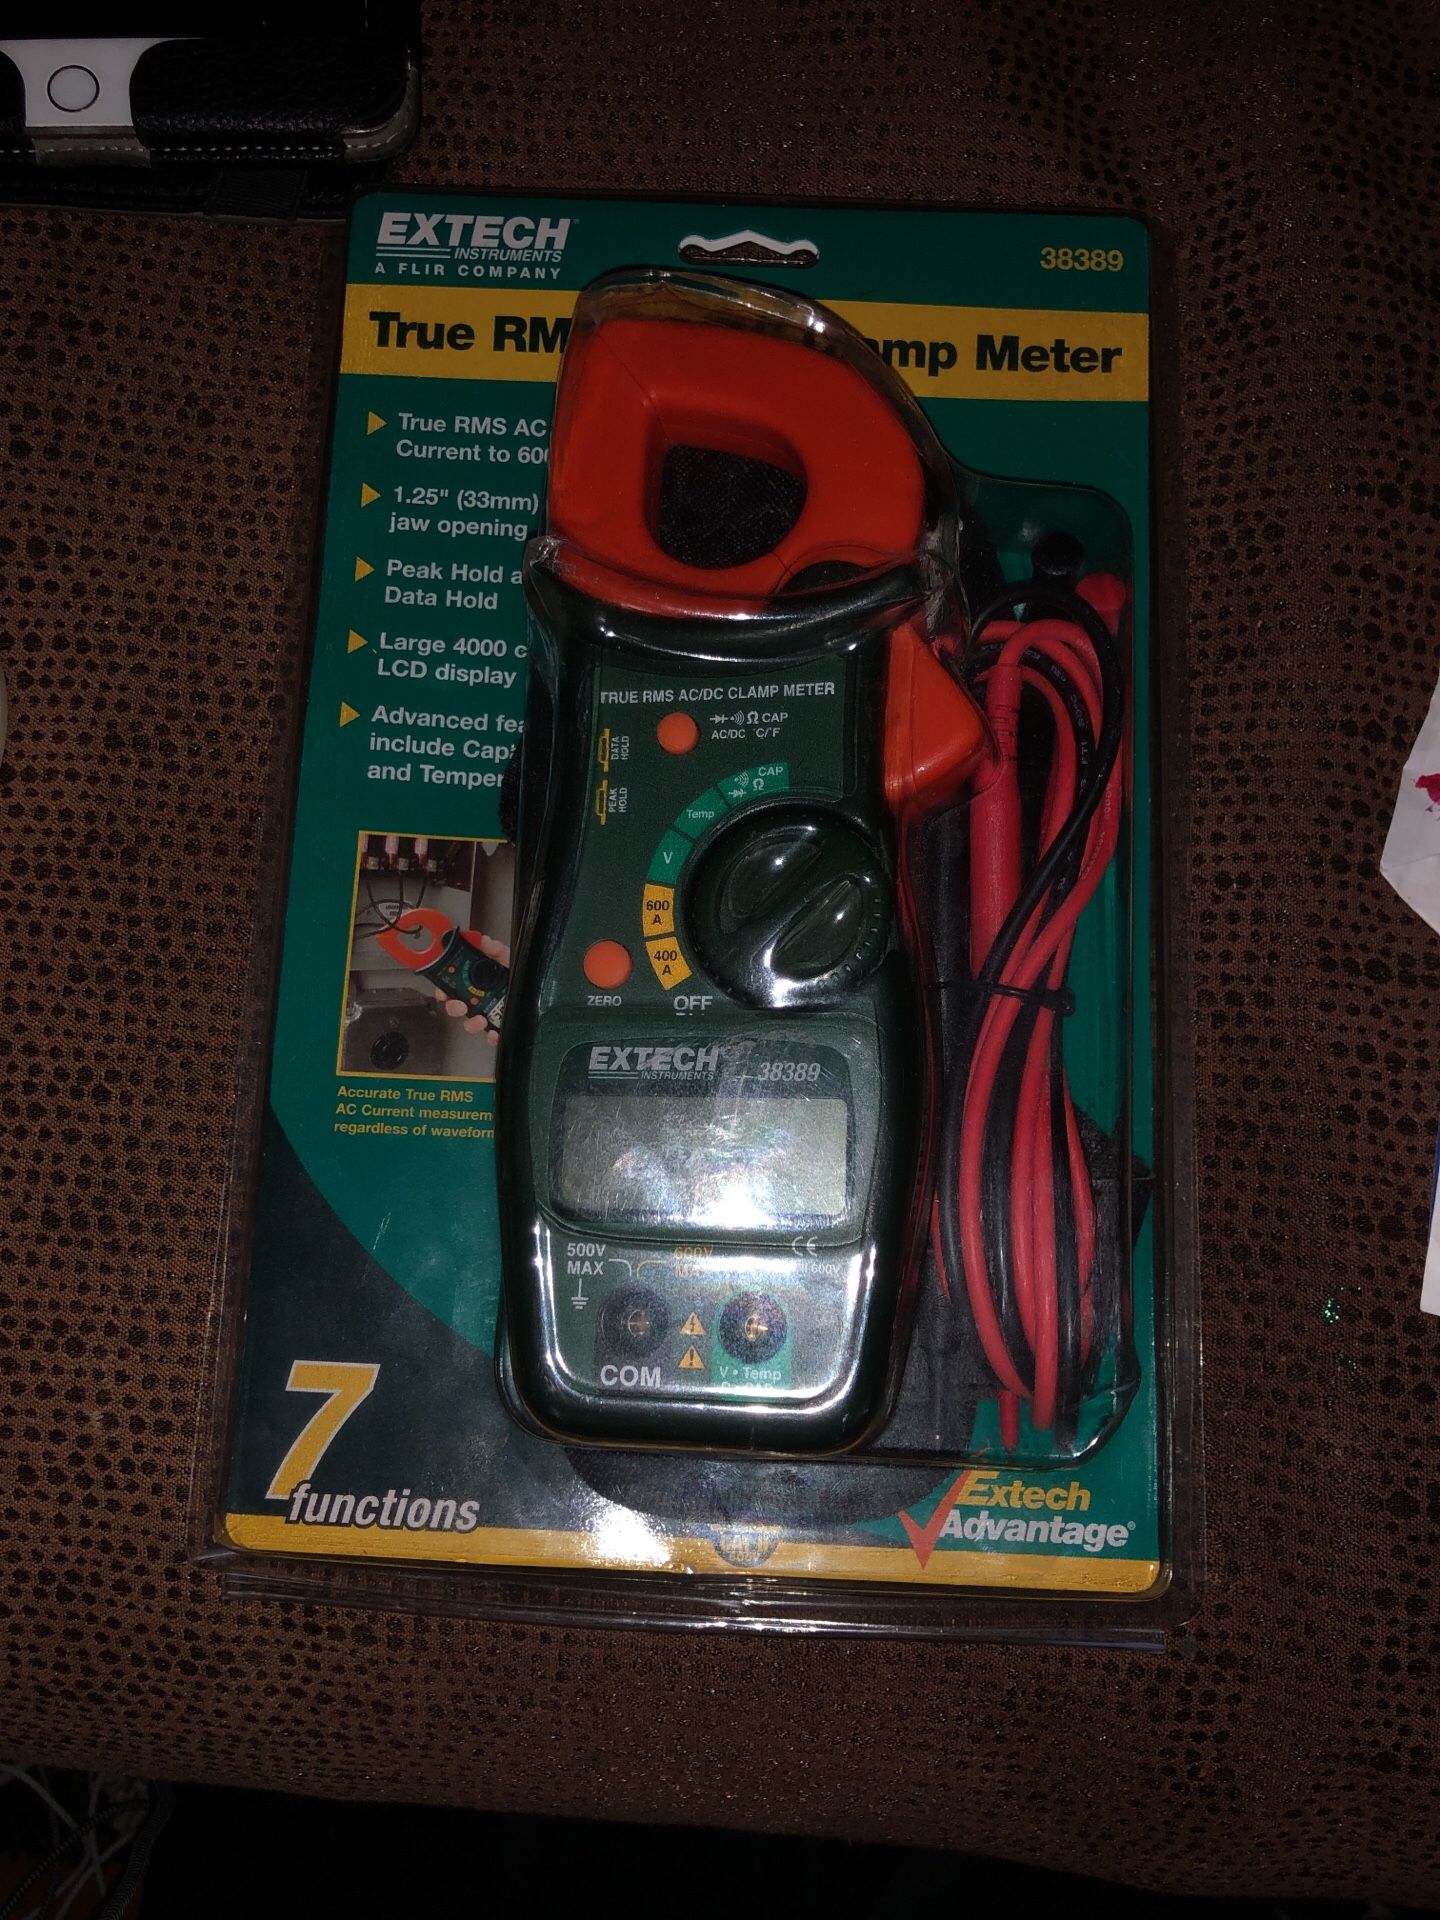 Extech true RMS AC/DC clamp meter in package